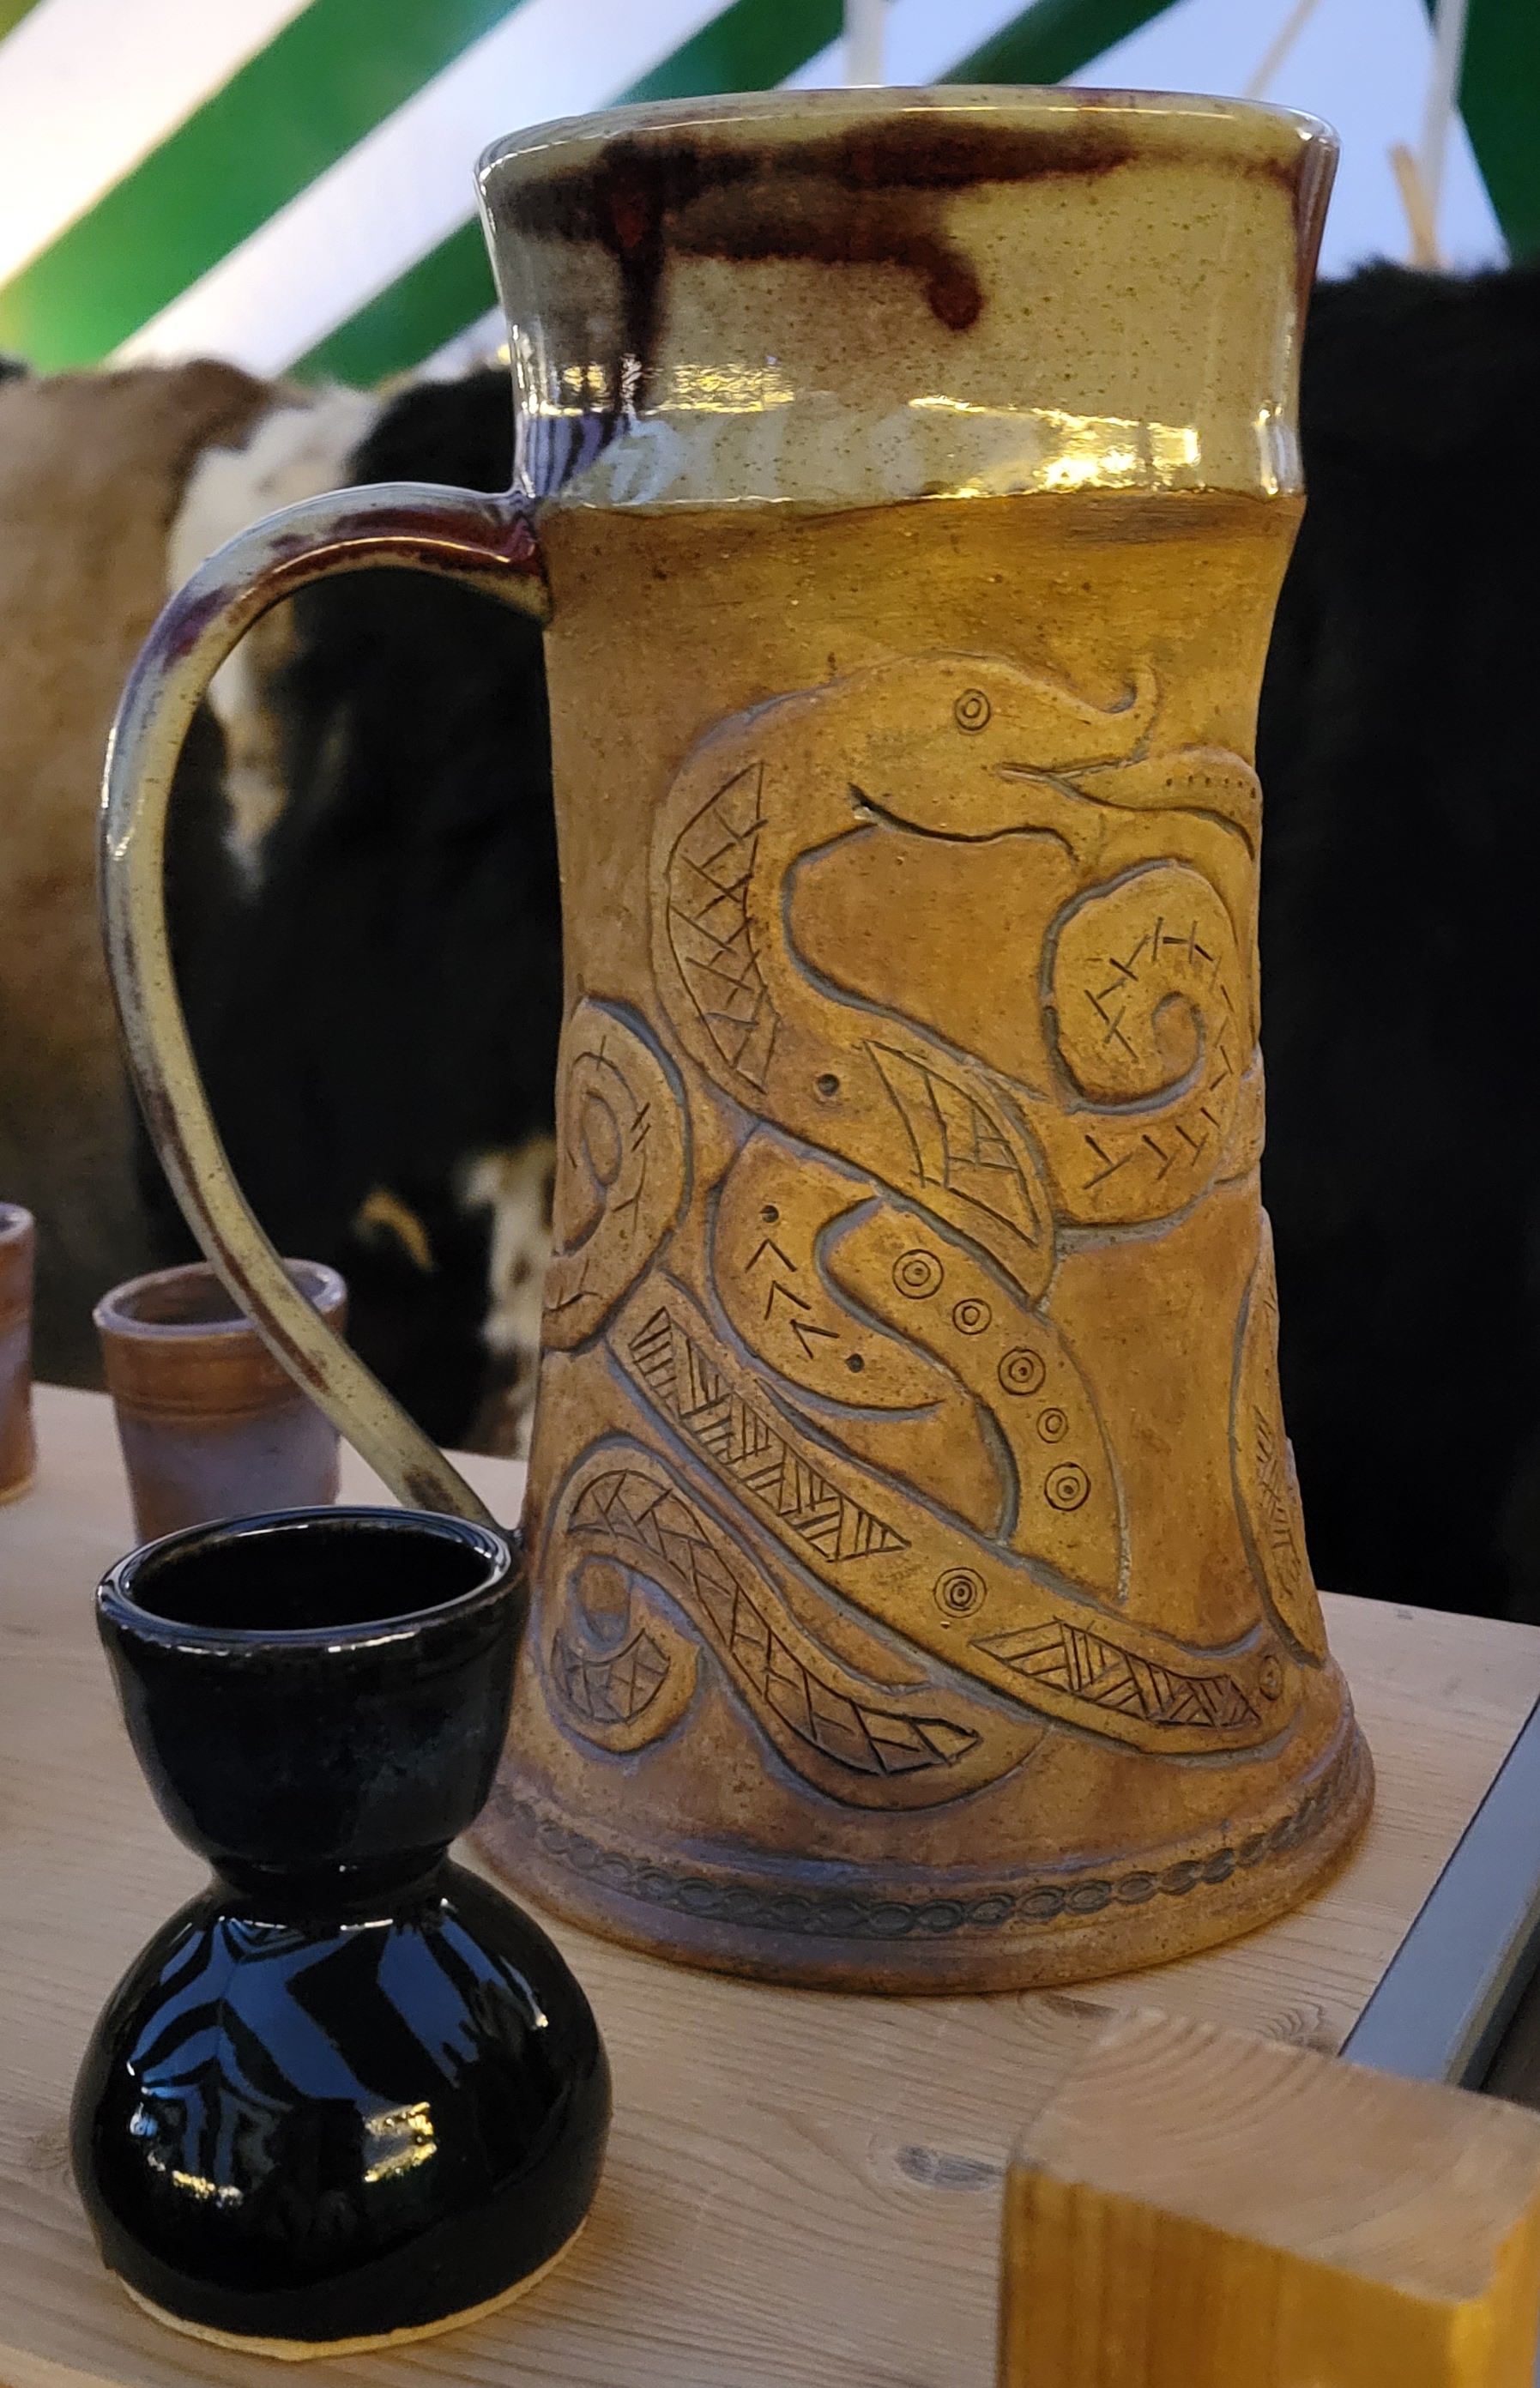 Beer stein by Michael George, owner of Ram's Head Craftworks, vendor at Michigan Nordic Fire Festival, Eaton County Fairgrounds in Charlotte, Michigan on Feb. 25, 2023